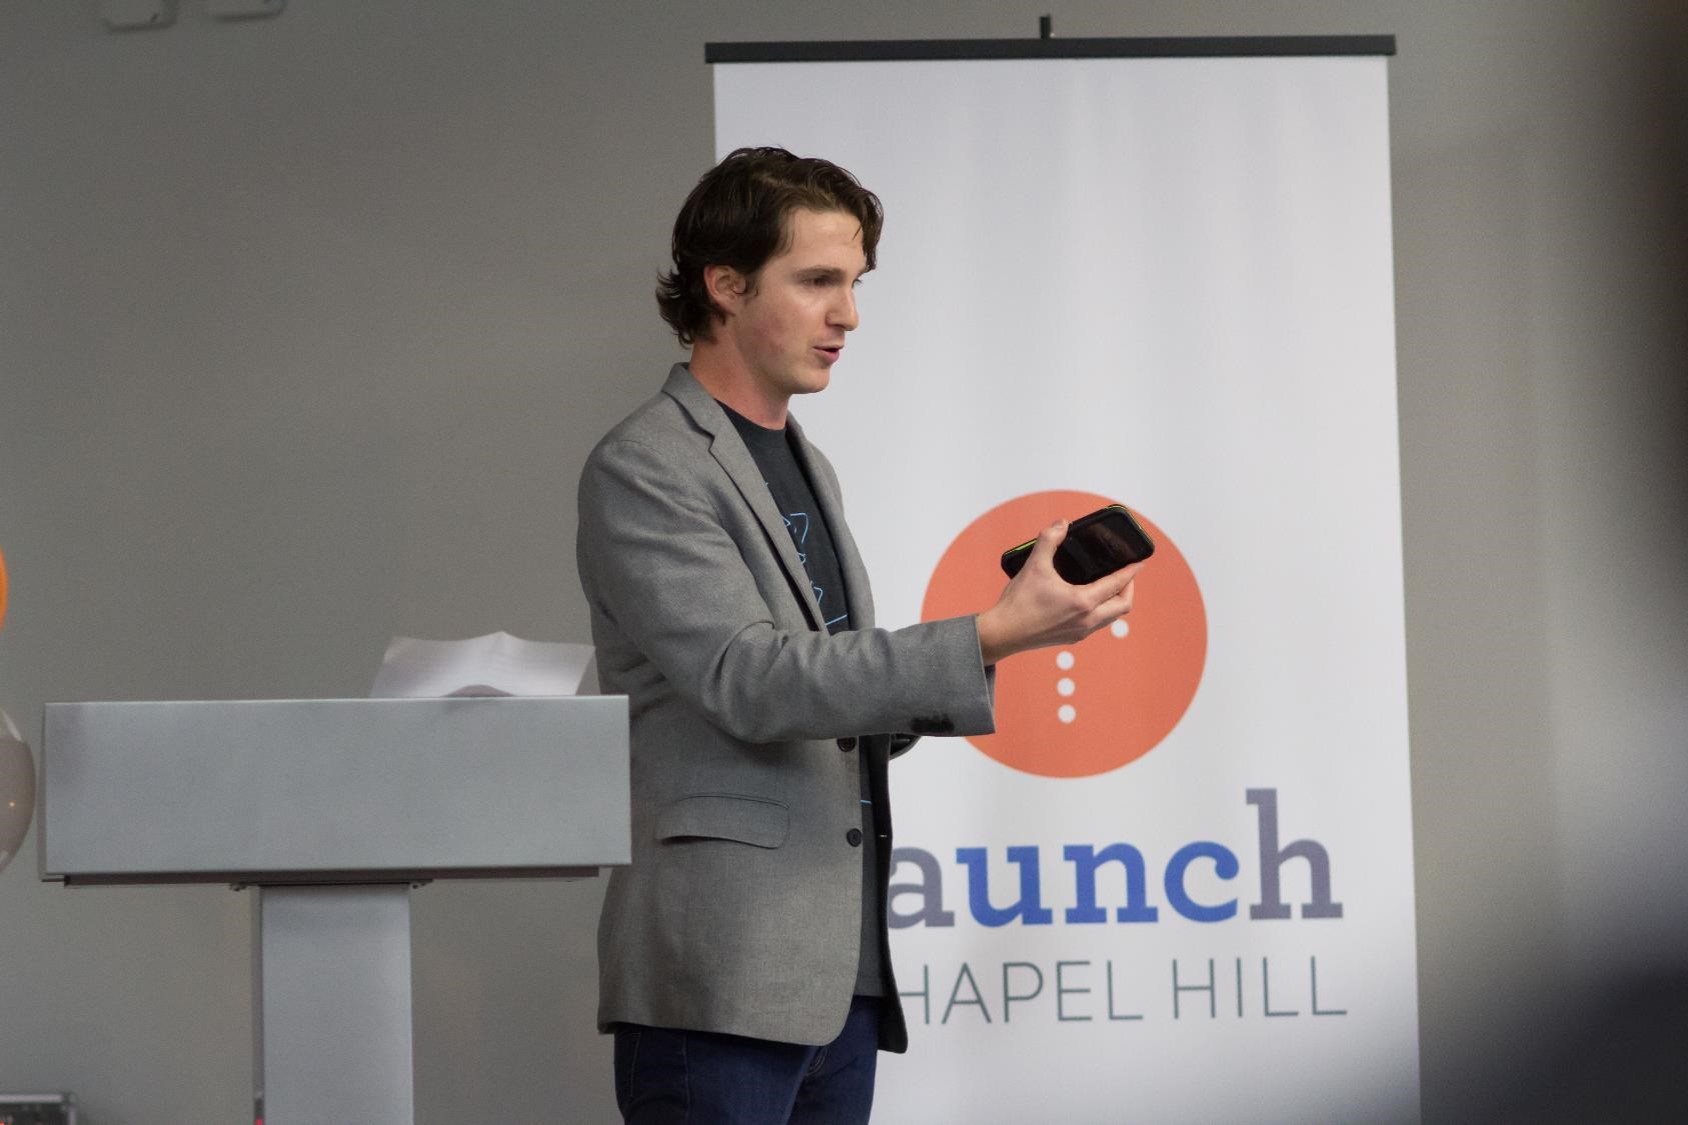 Alain Glanzman, co-founder of WalletFi, describes his company's experience after graduating from startup accelerator Launch Chapel Hill.